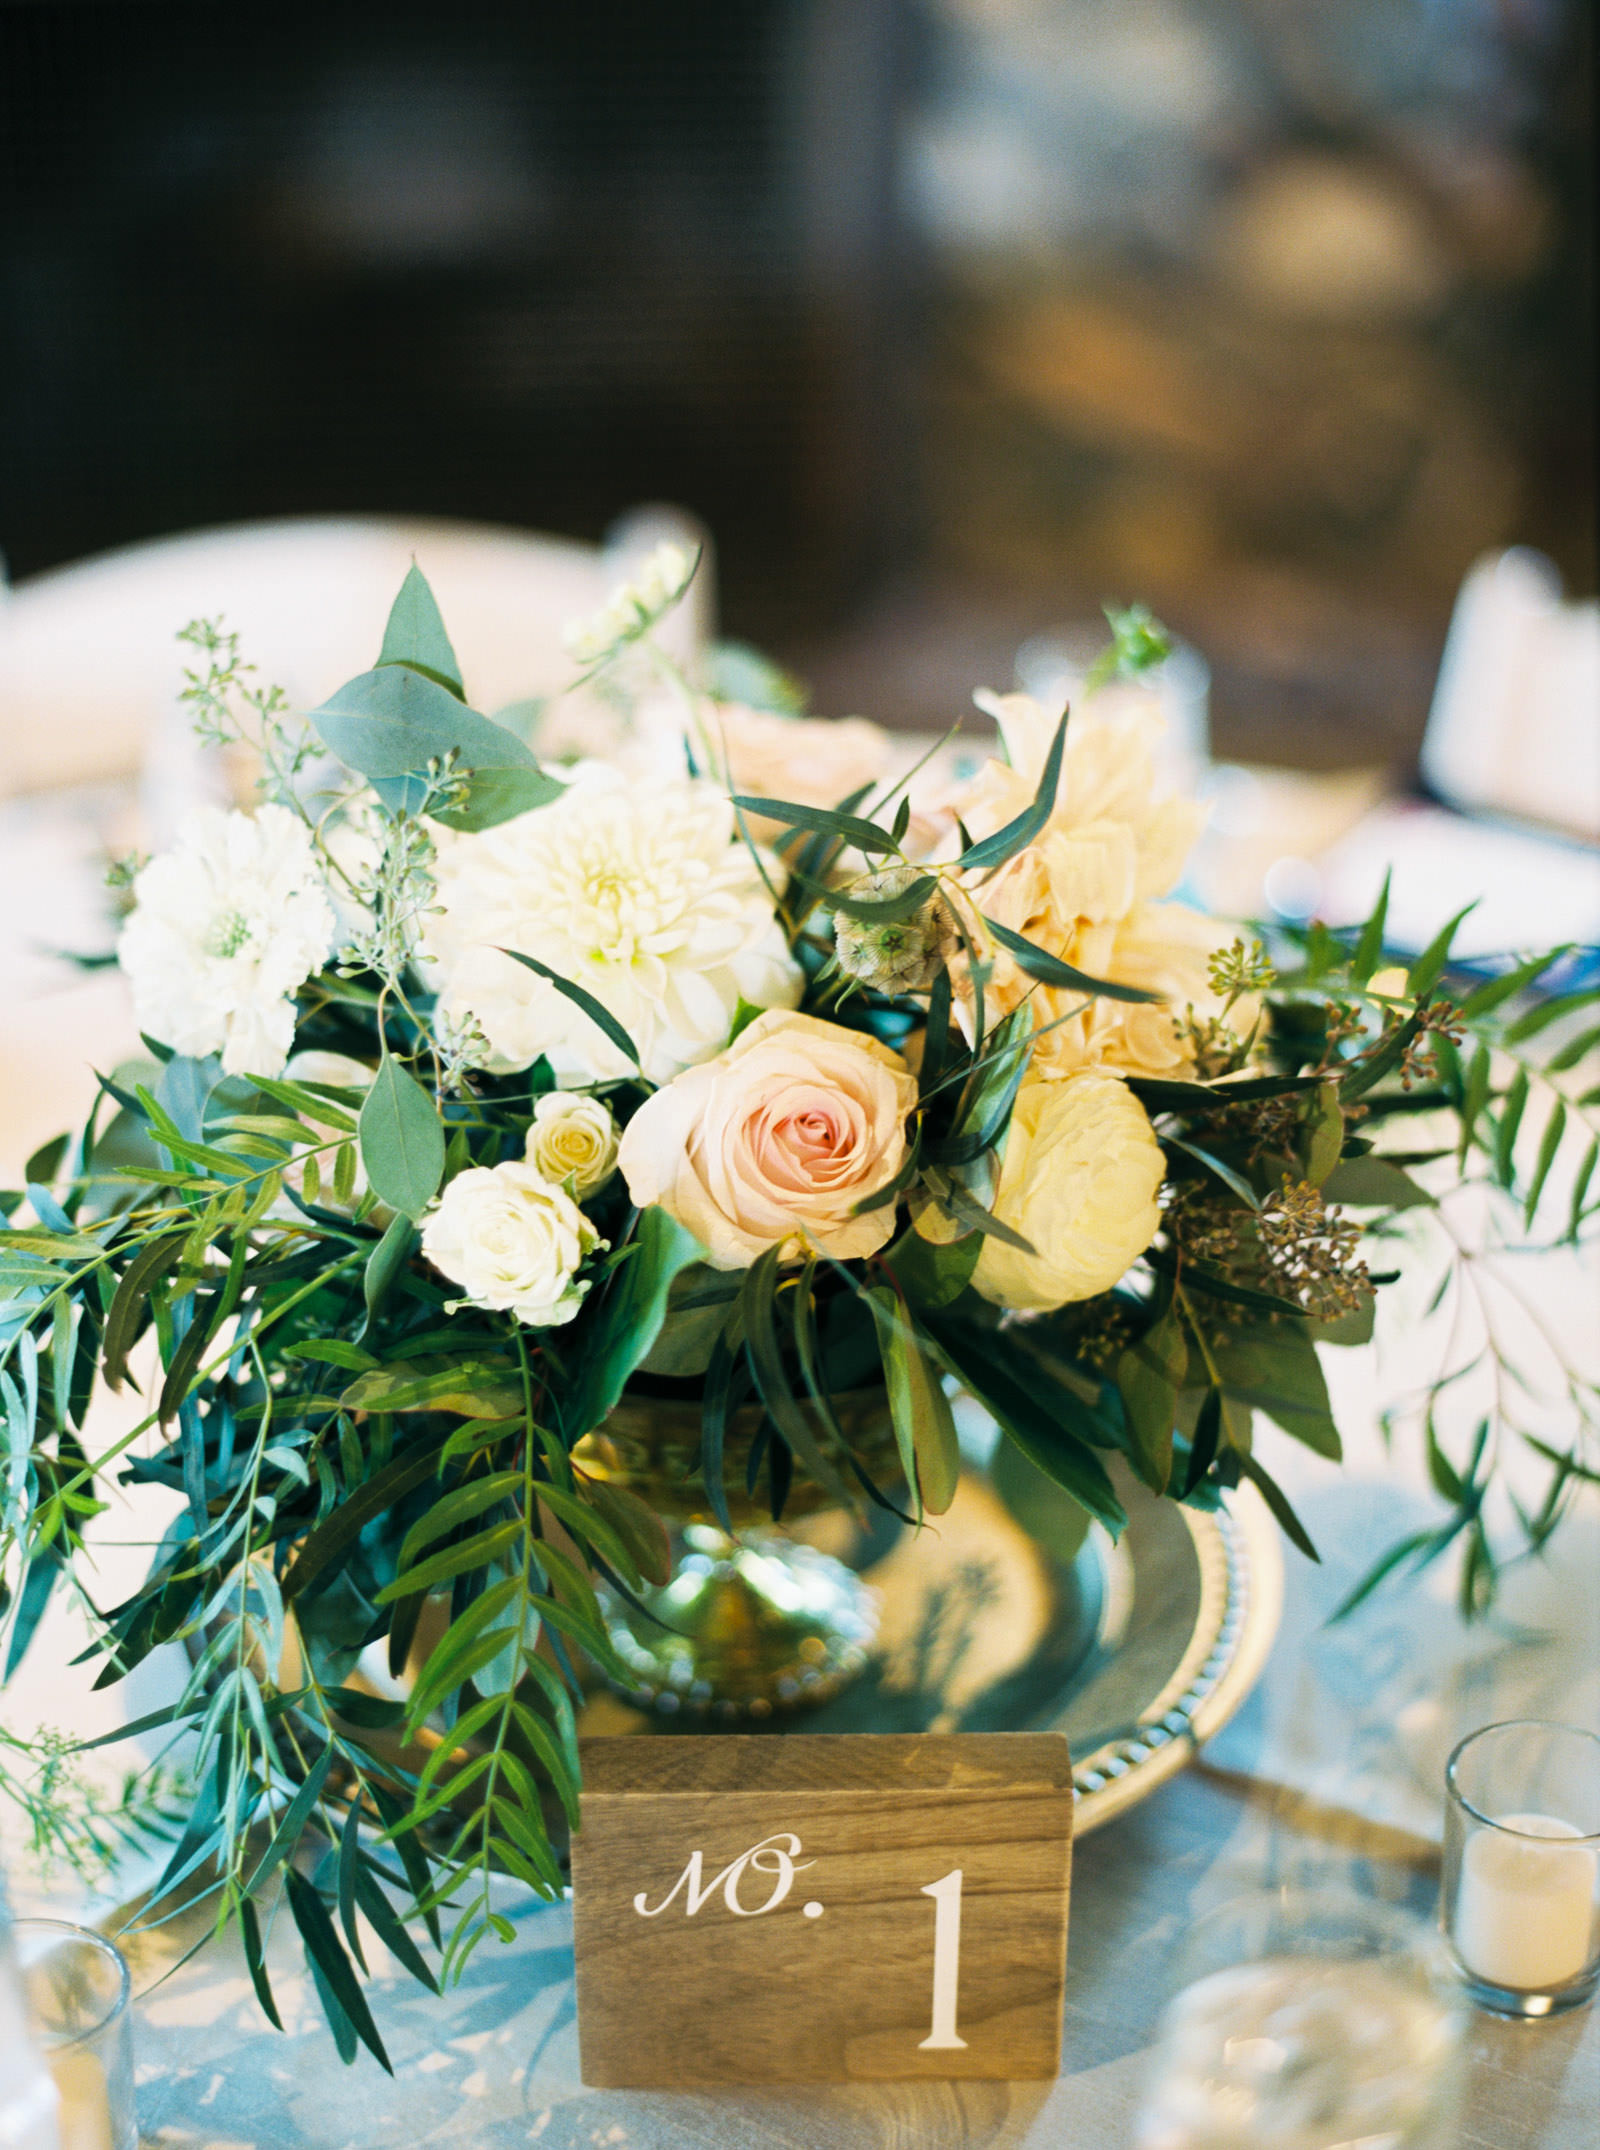 Reception details at a fall Kelley Farms Wedding captured by Film Photographer Anna Peters